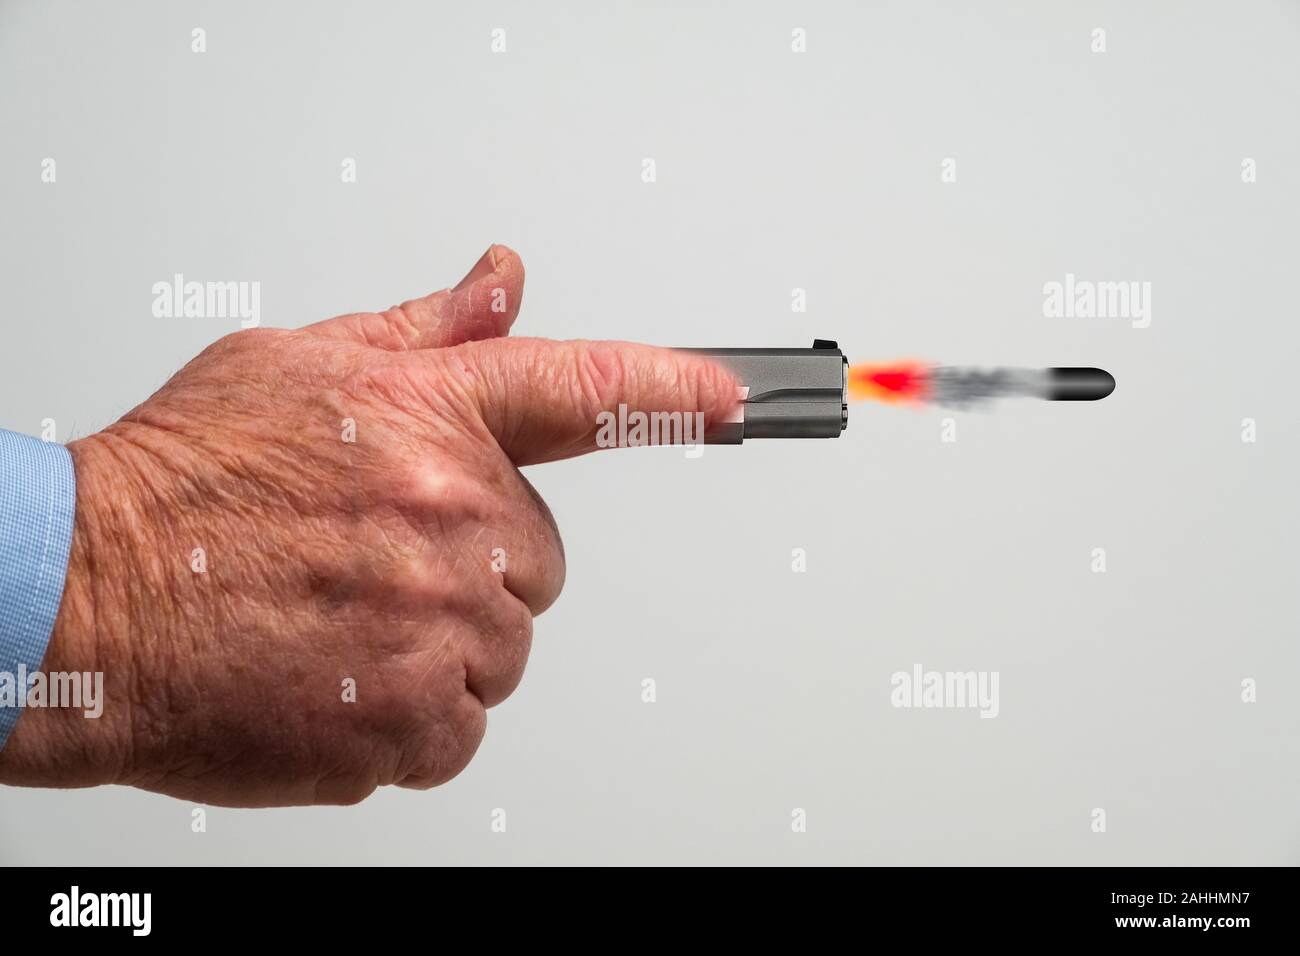 You're fired - a man fires an employee who does not measure up. Stock Photo